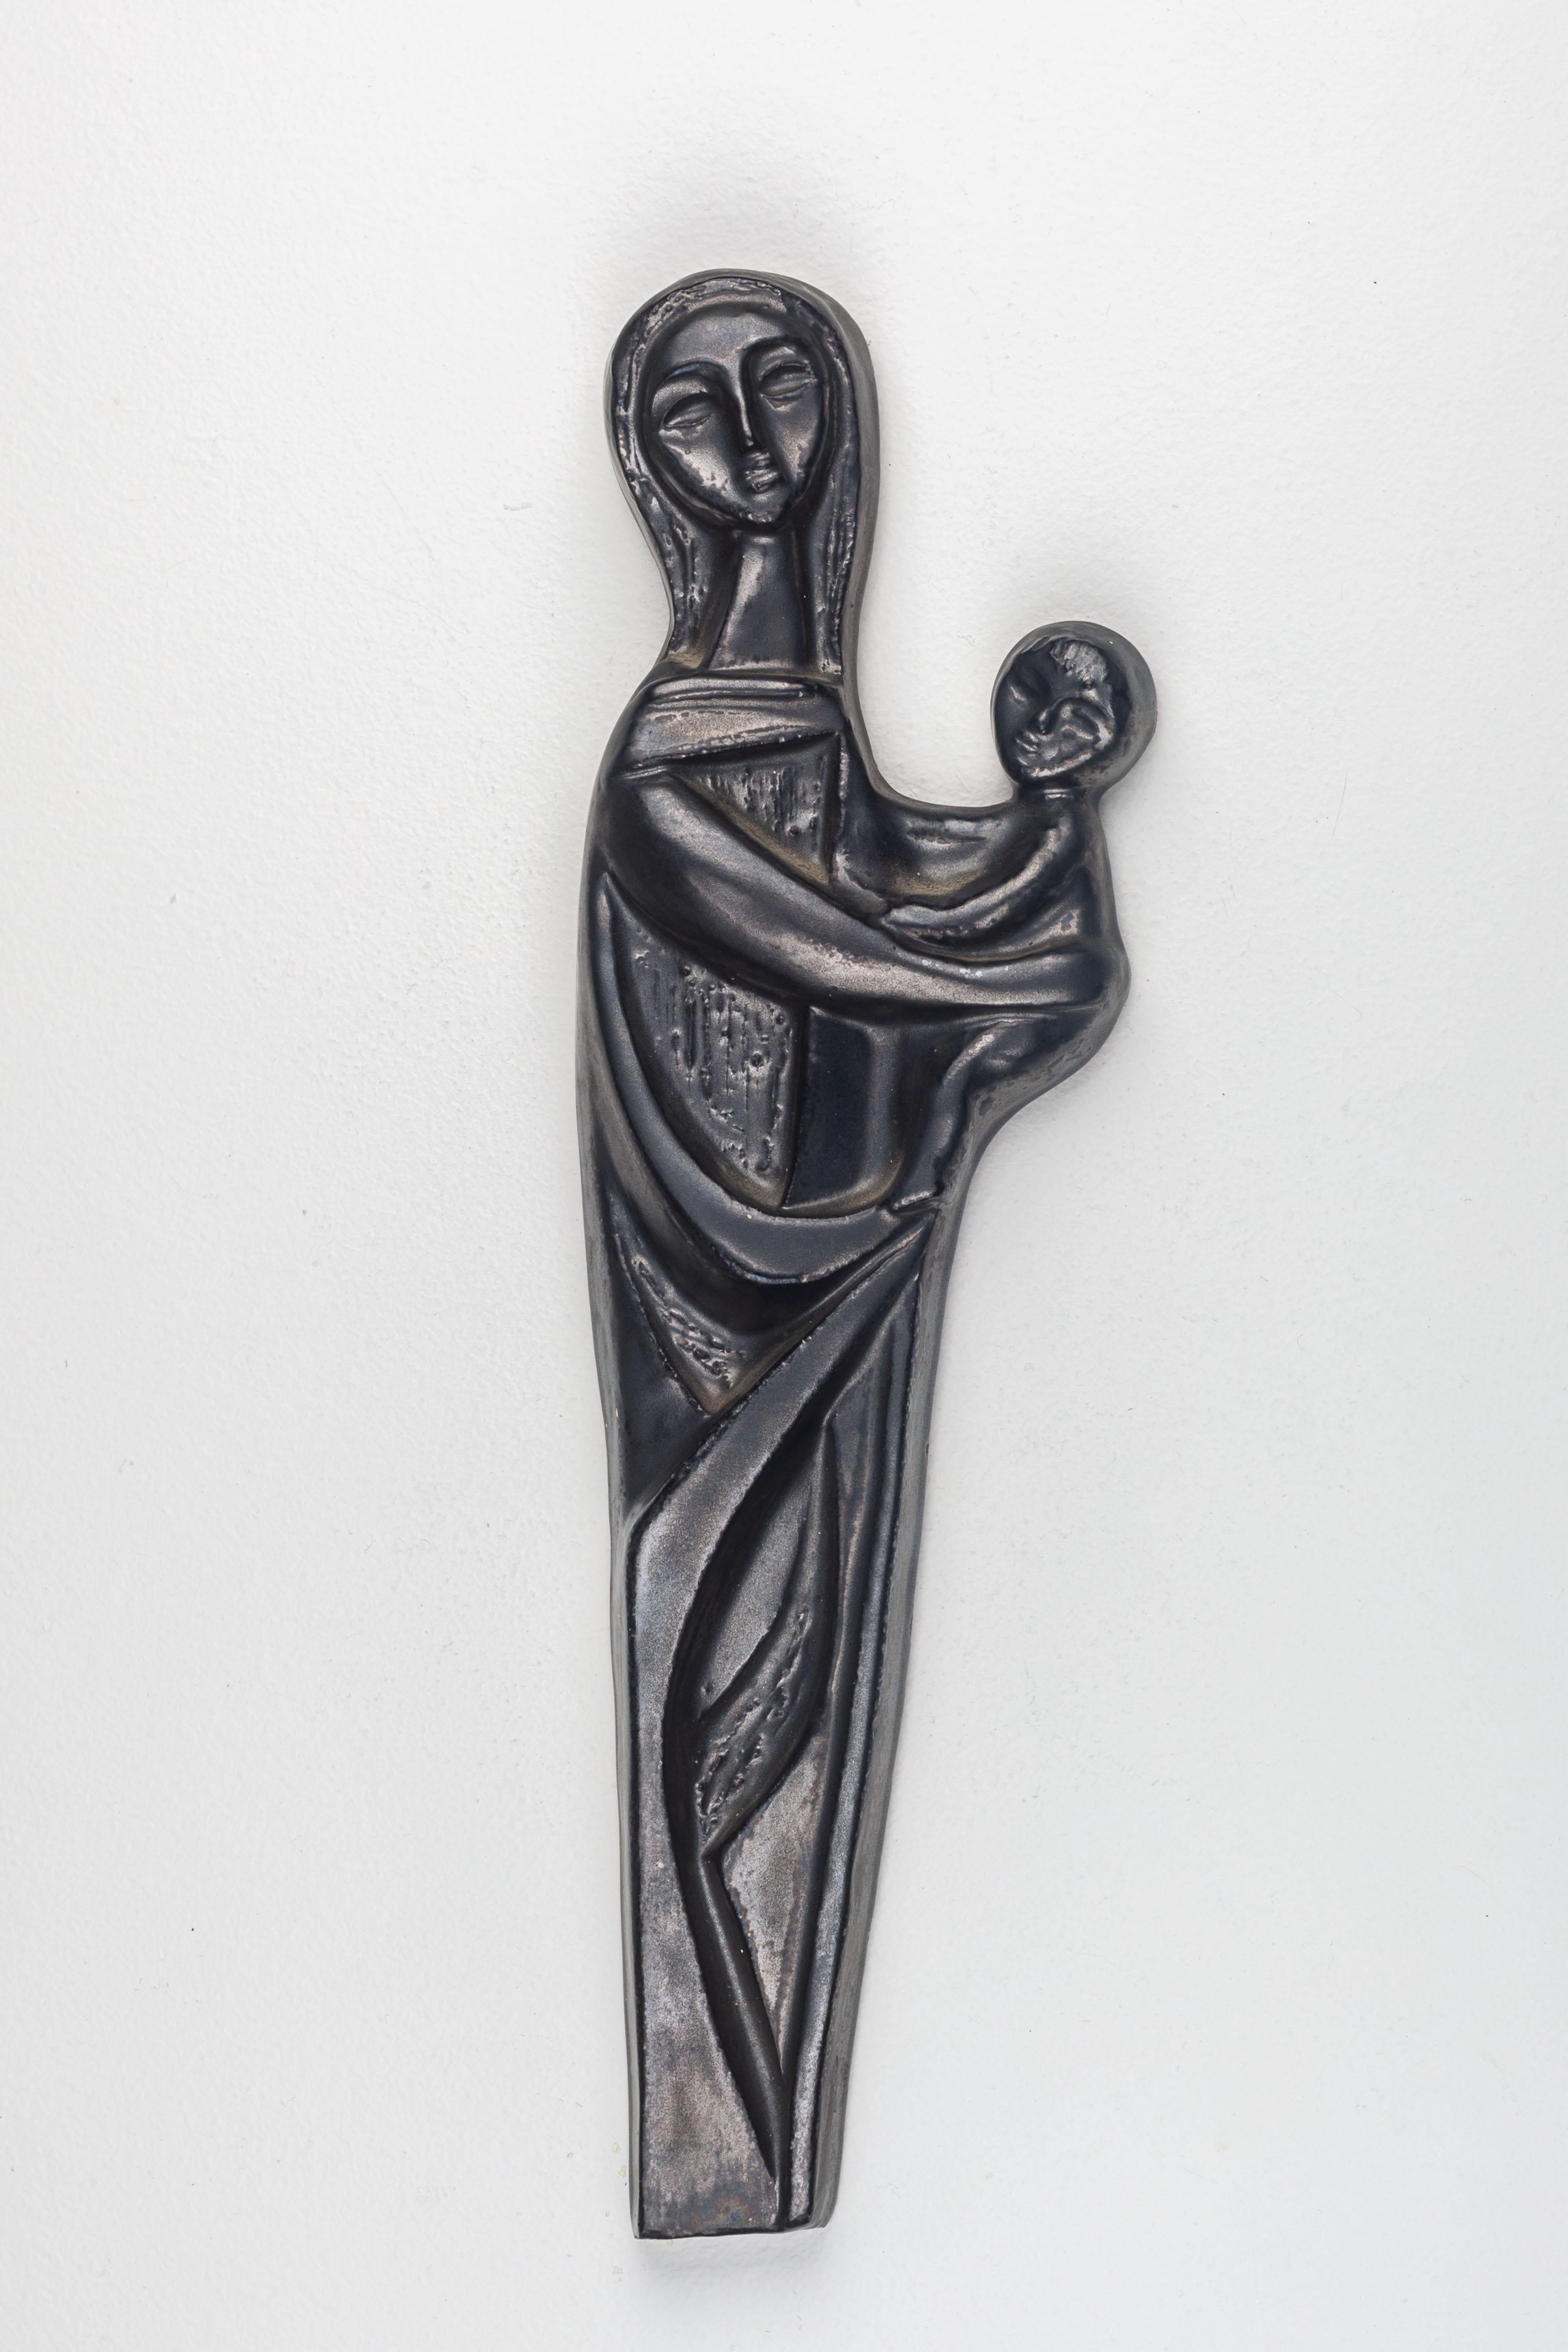 Ceramic Religious Modernist Wall Art, Pewter Colored Virgin Mary and Child  In Good Condition For Sale In Chicago, IL